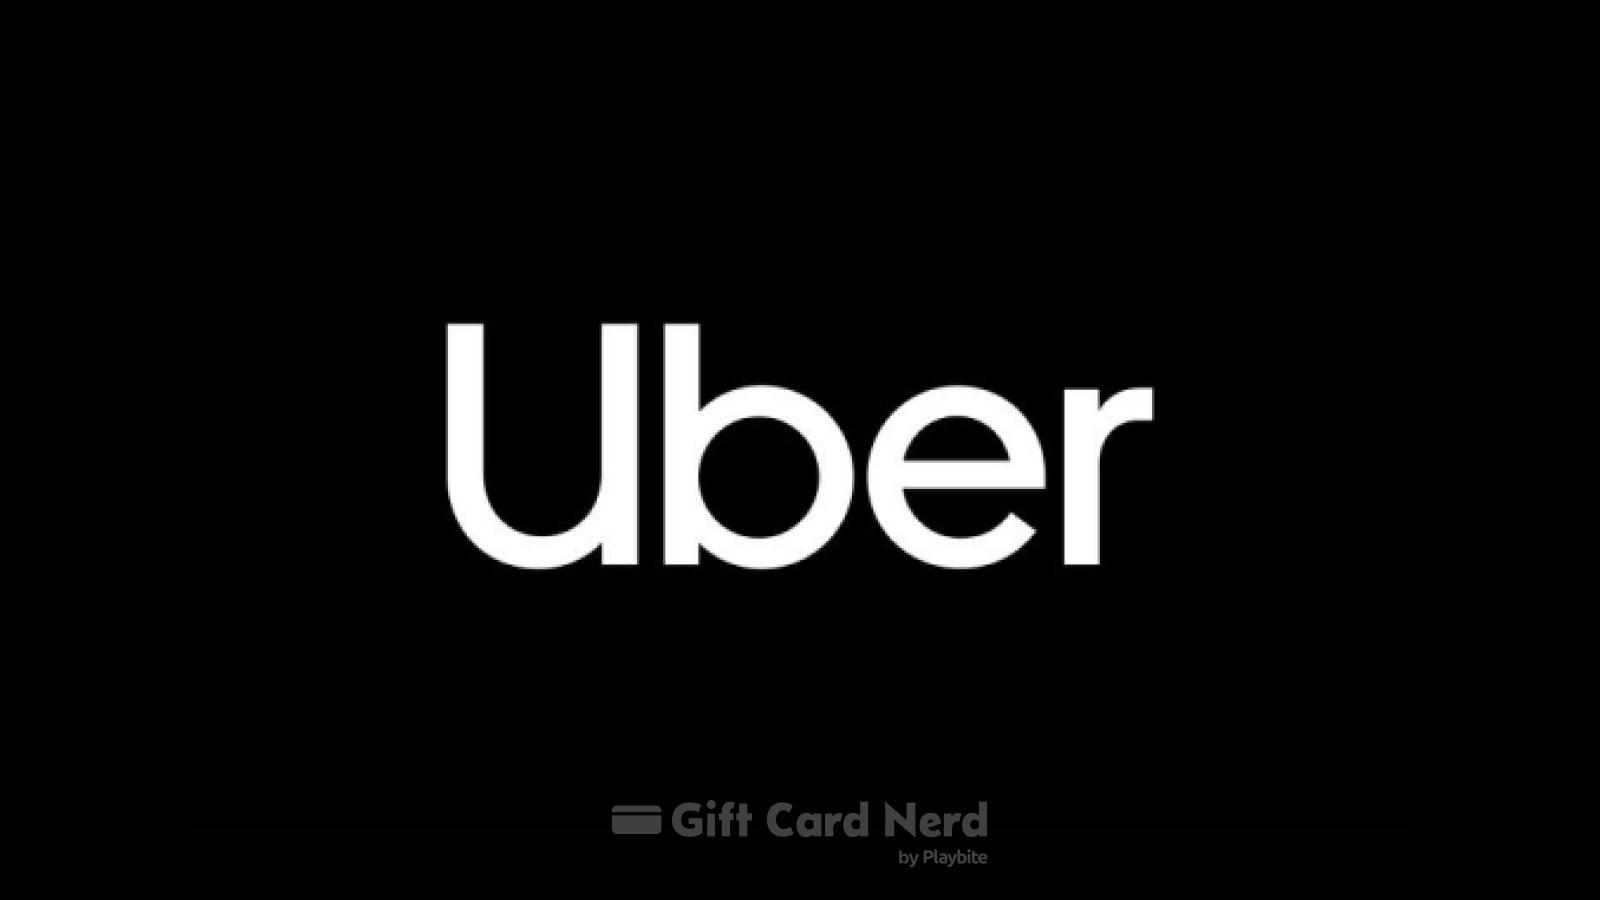 Can You Use an Uber Gift Card on Steam?